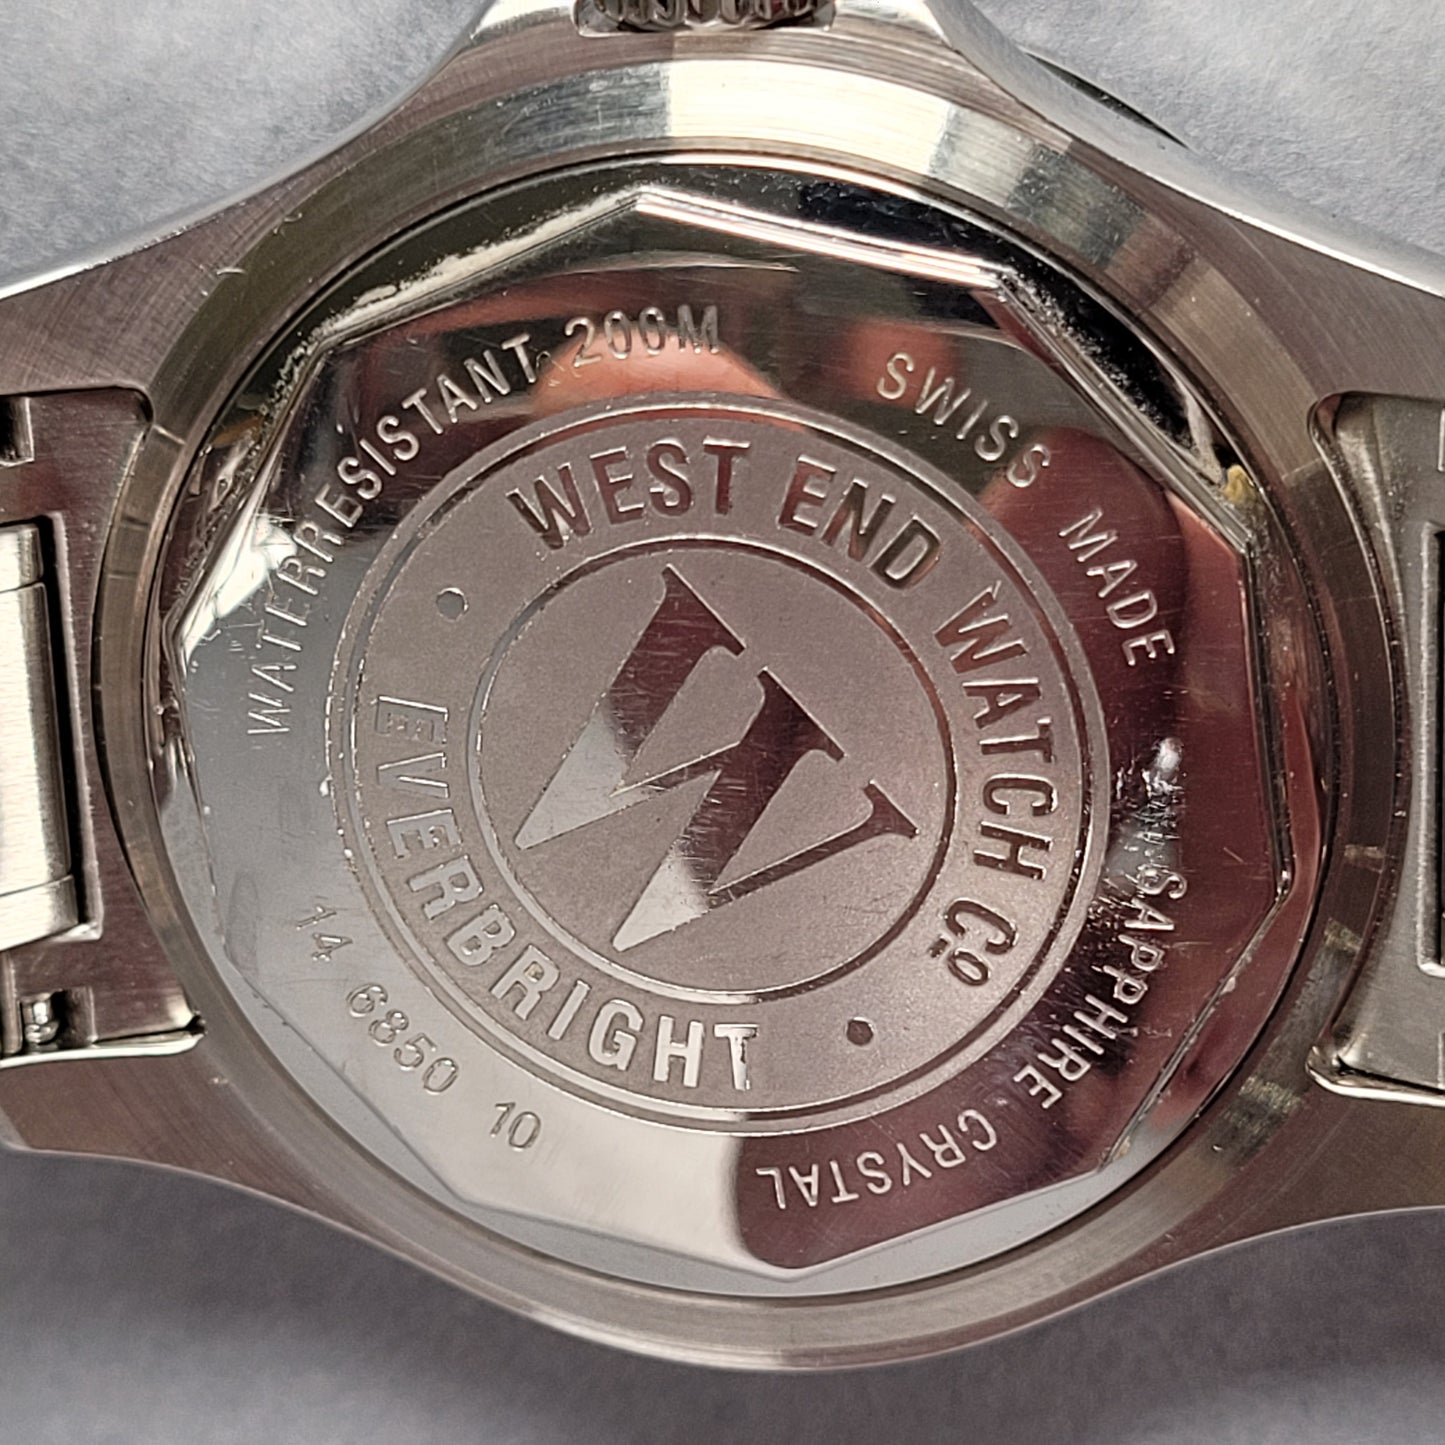 West End Watch Co. "Impermeable" 42mm Men's Watch